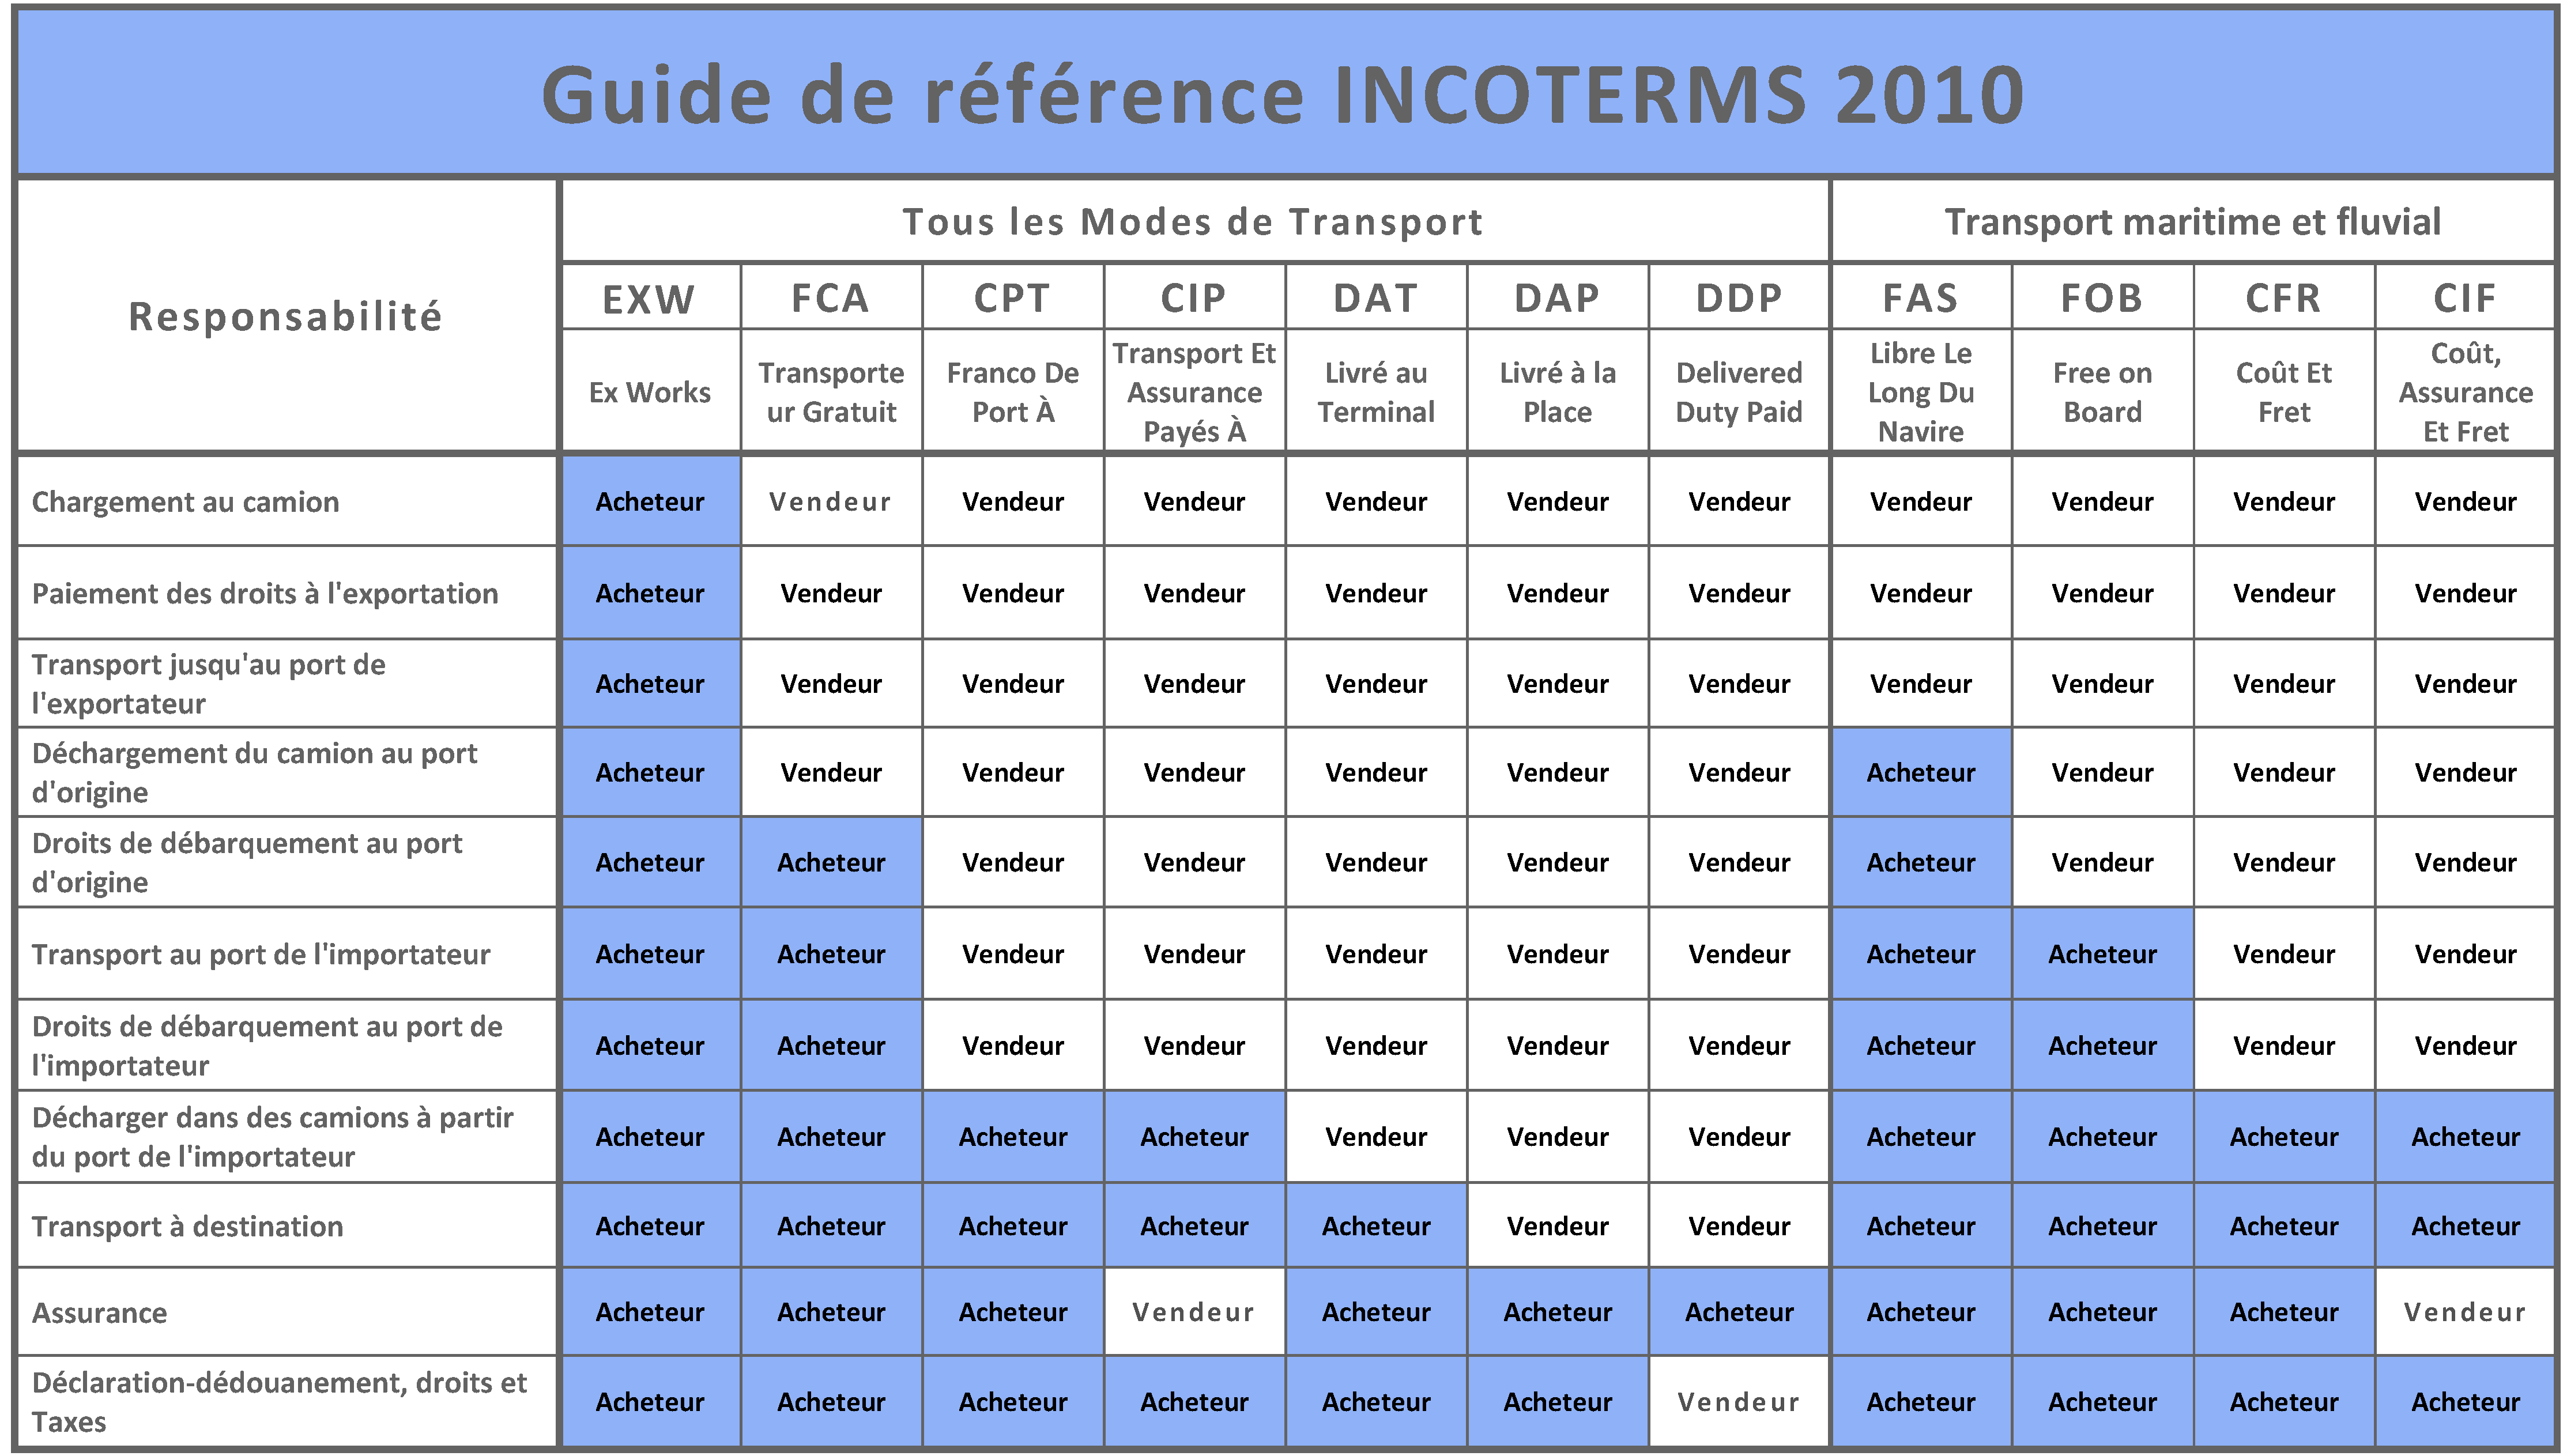 INCOTERMS 2010 scope